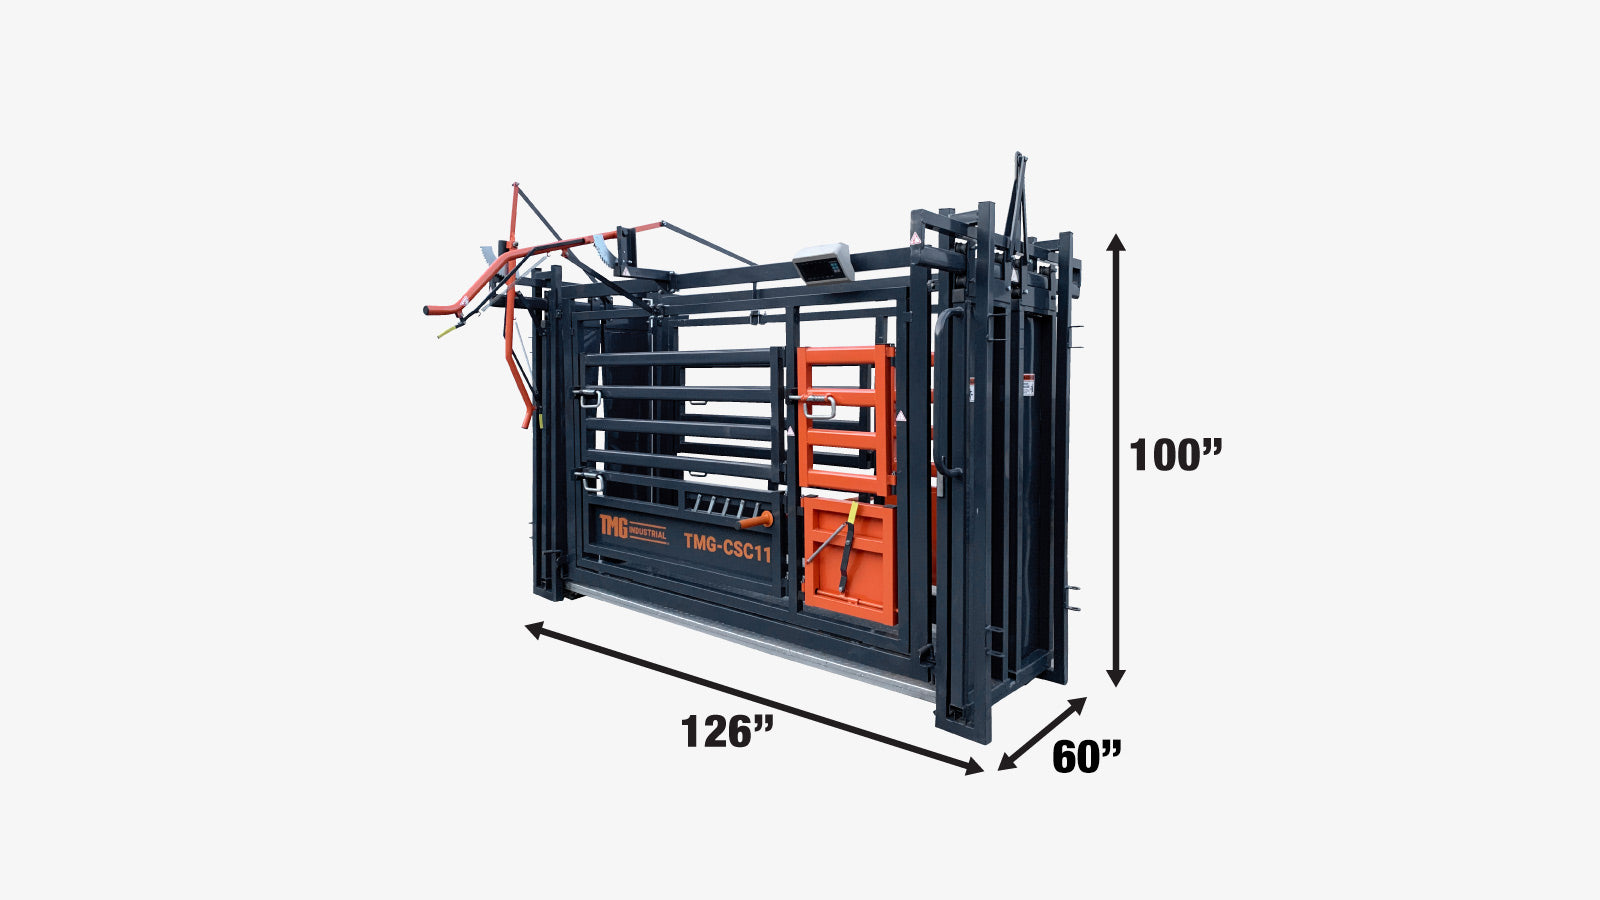 TMG Industrial 10’ Squeeze Cattle Work Chute 4500-lb Weight Scale, Side Exit, Side Squeeze, Upper/Lower Swing Openings, LCD Weight Display, TMG-CSC11-specifications-image